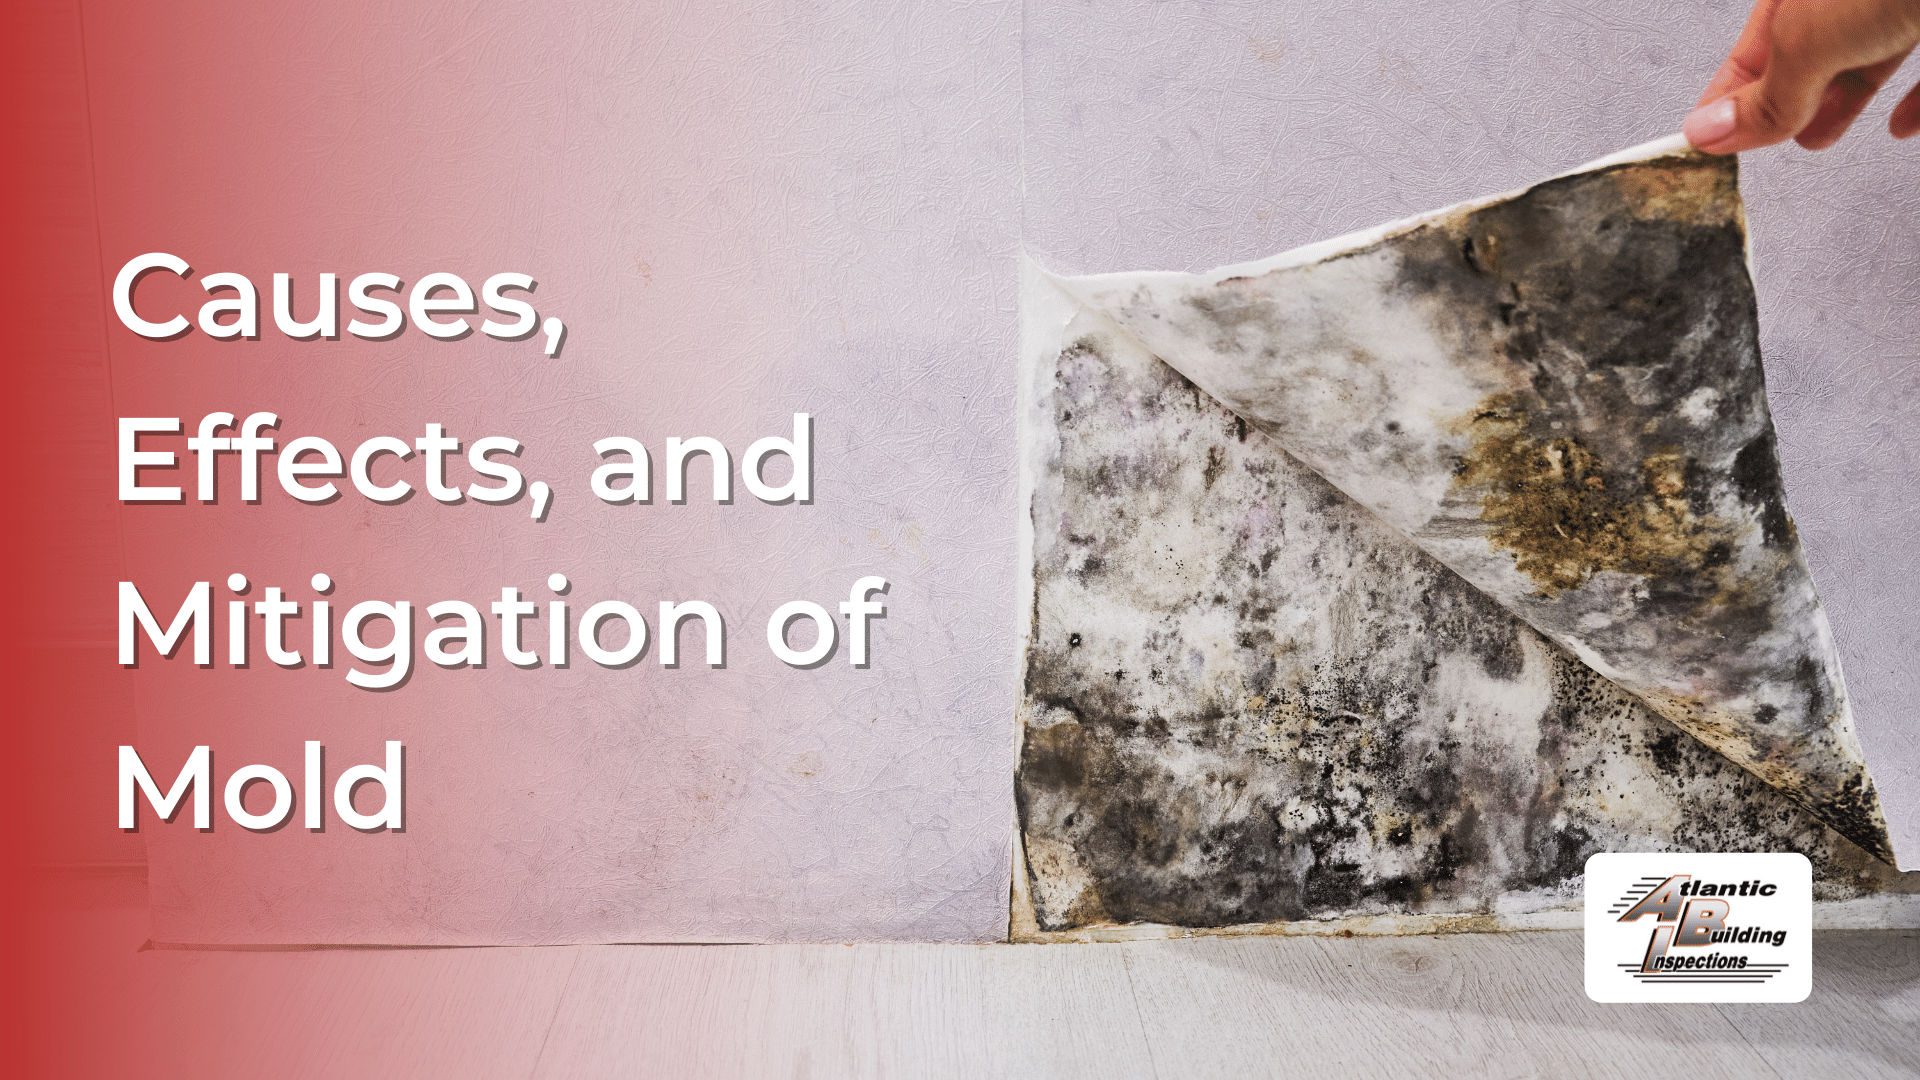 Causes, Effects, and Mitigation of Mold